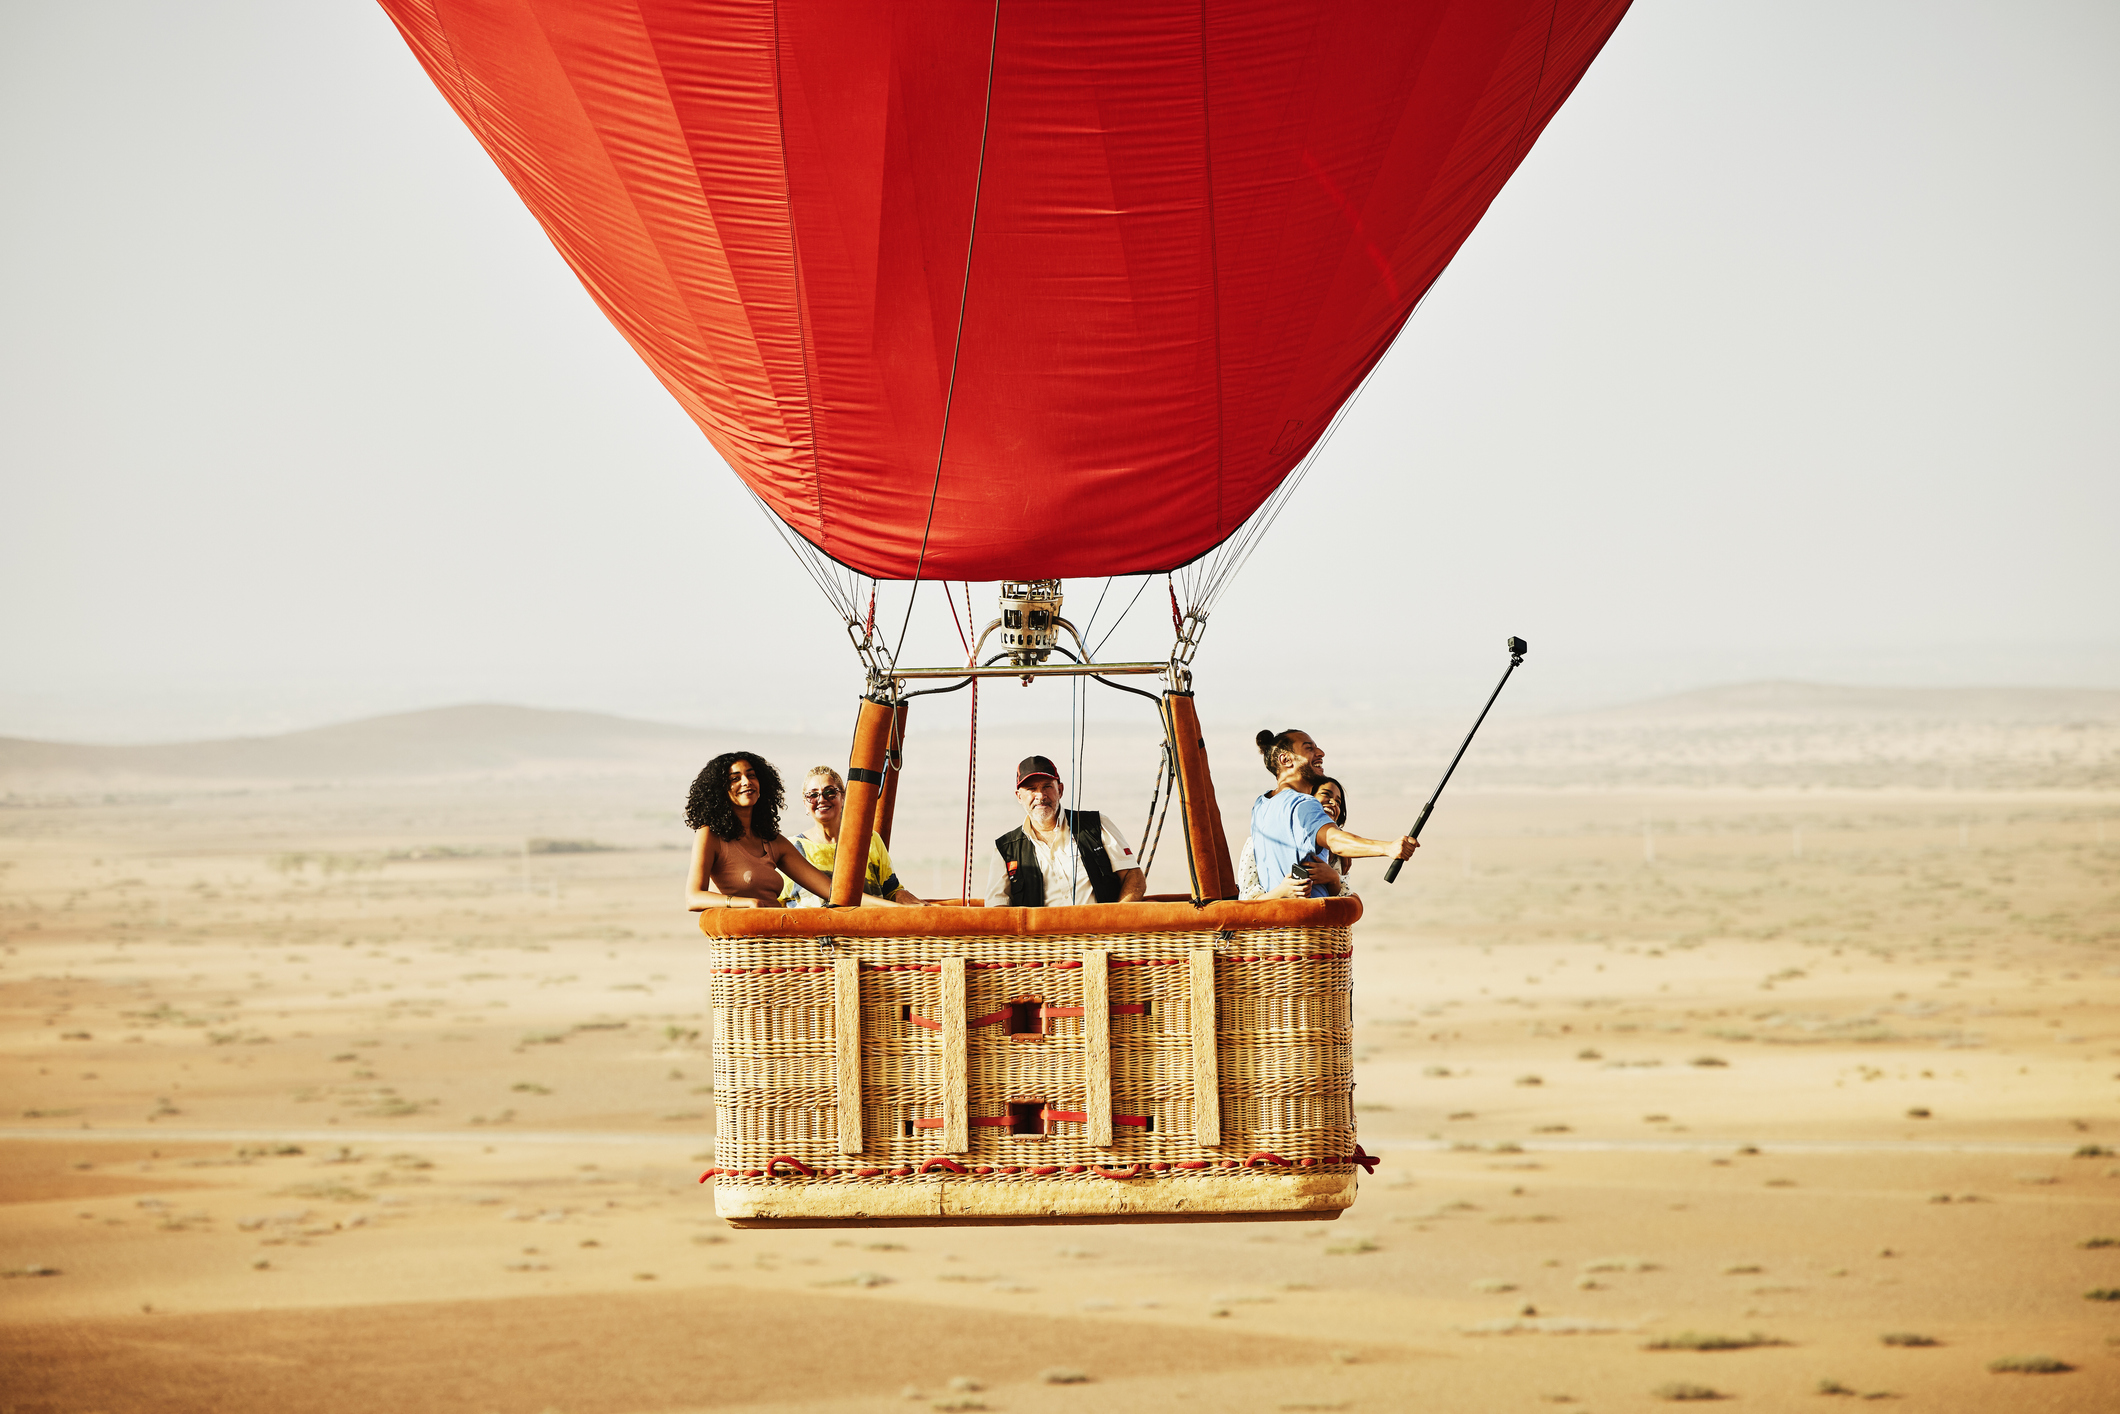 Aerial view of Morocco's desert from a hot air balloon.